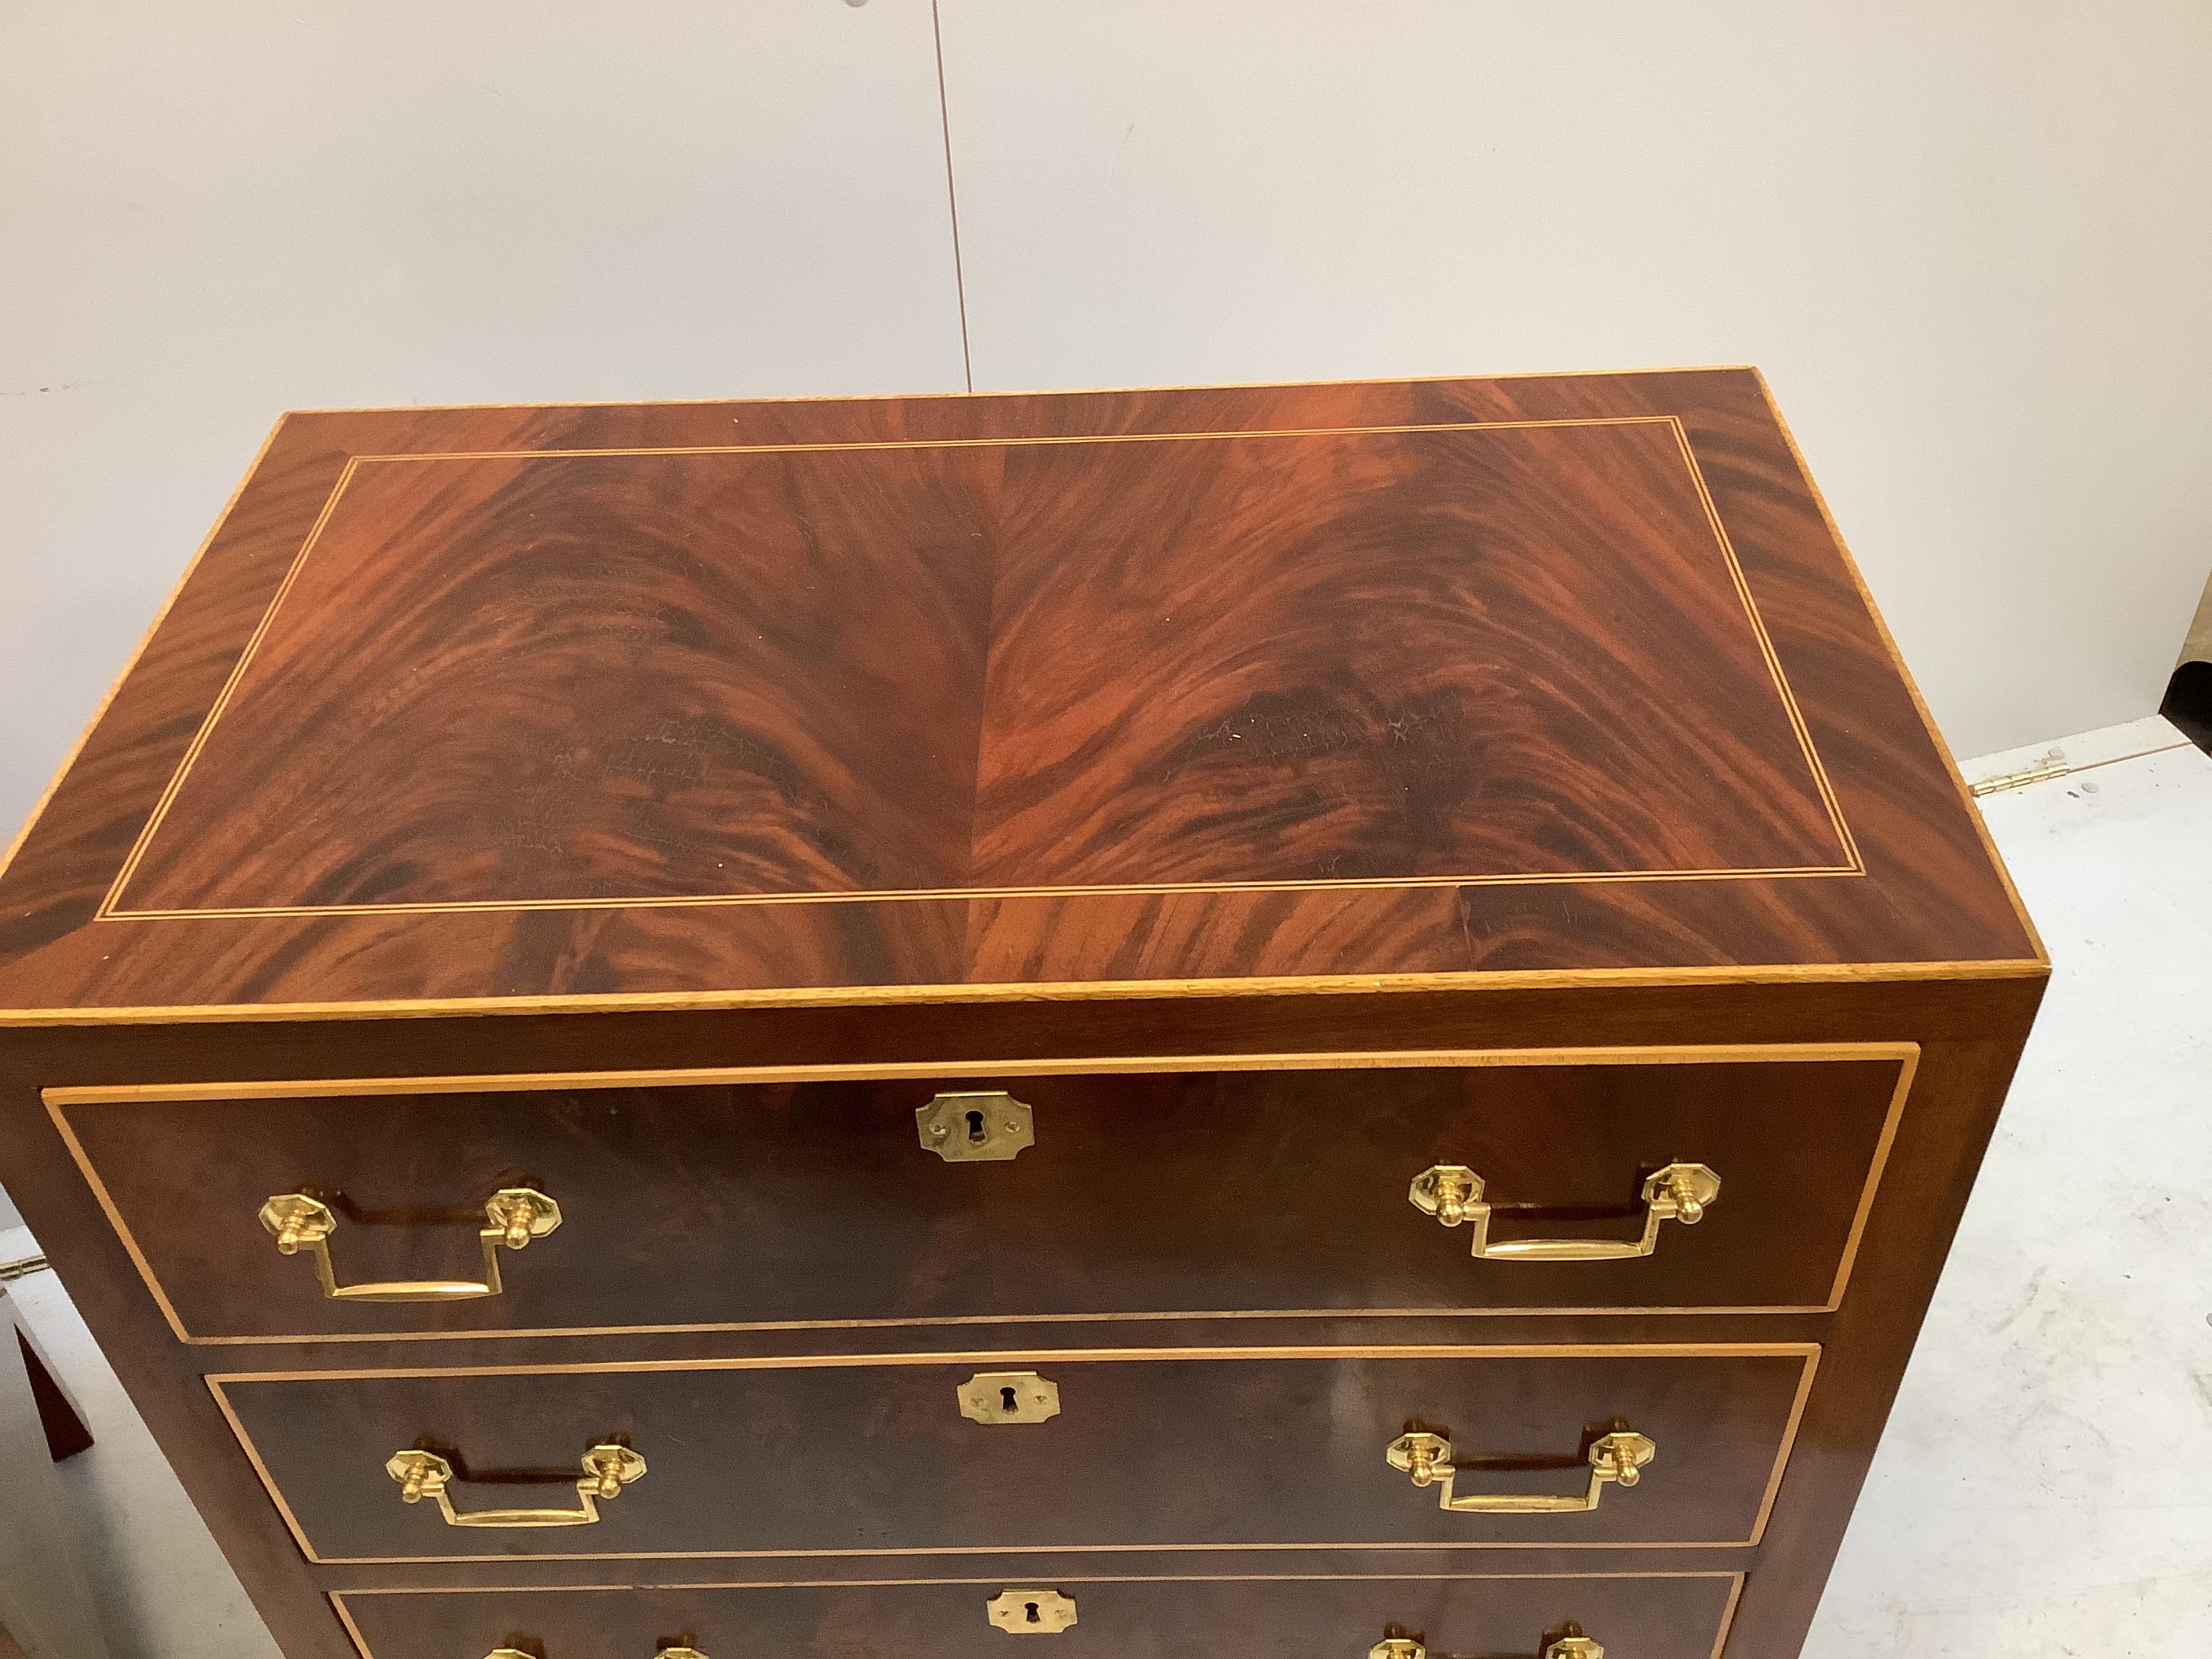 A pair of George IV style inlaid mahogany three drawer chests, width 79cm, depth 46cm, height 78cm